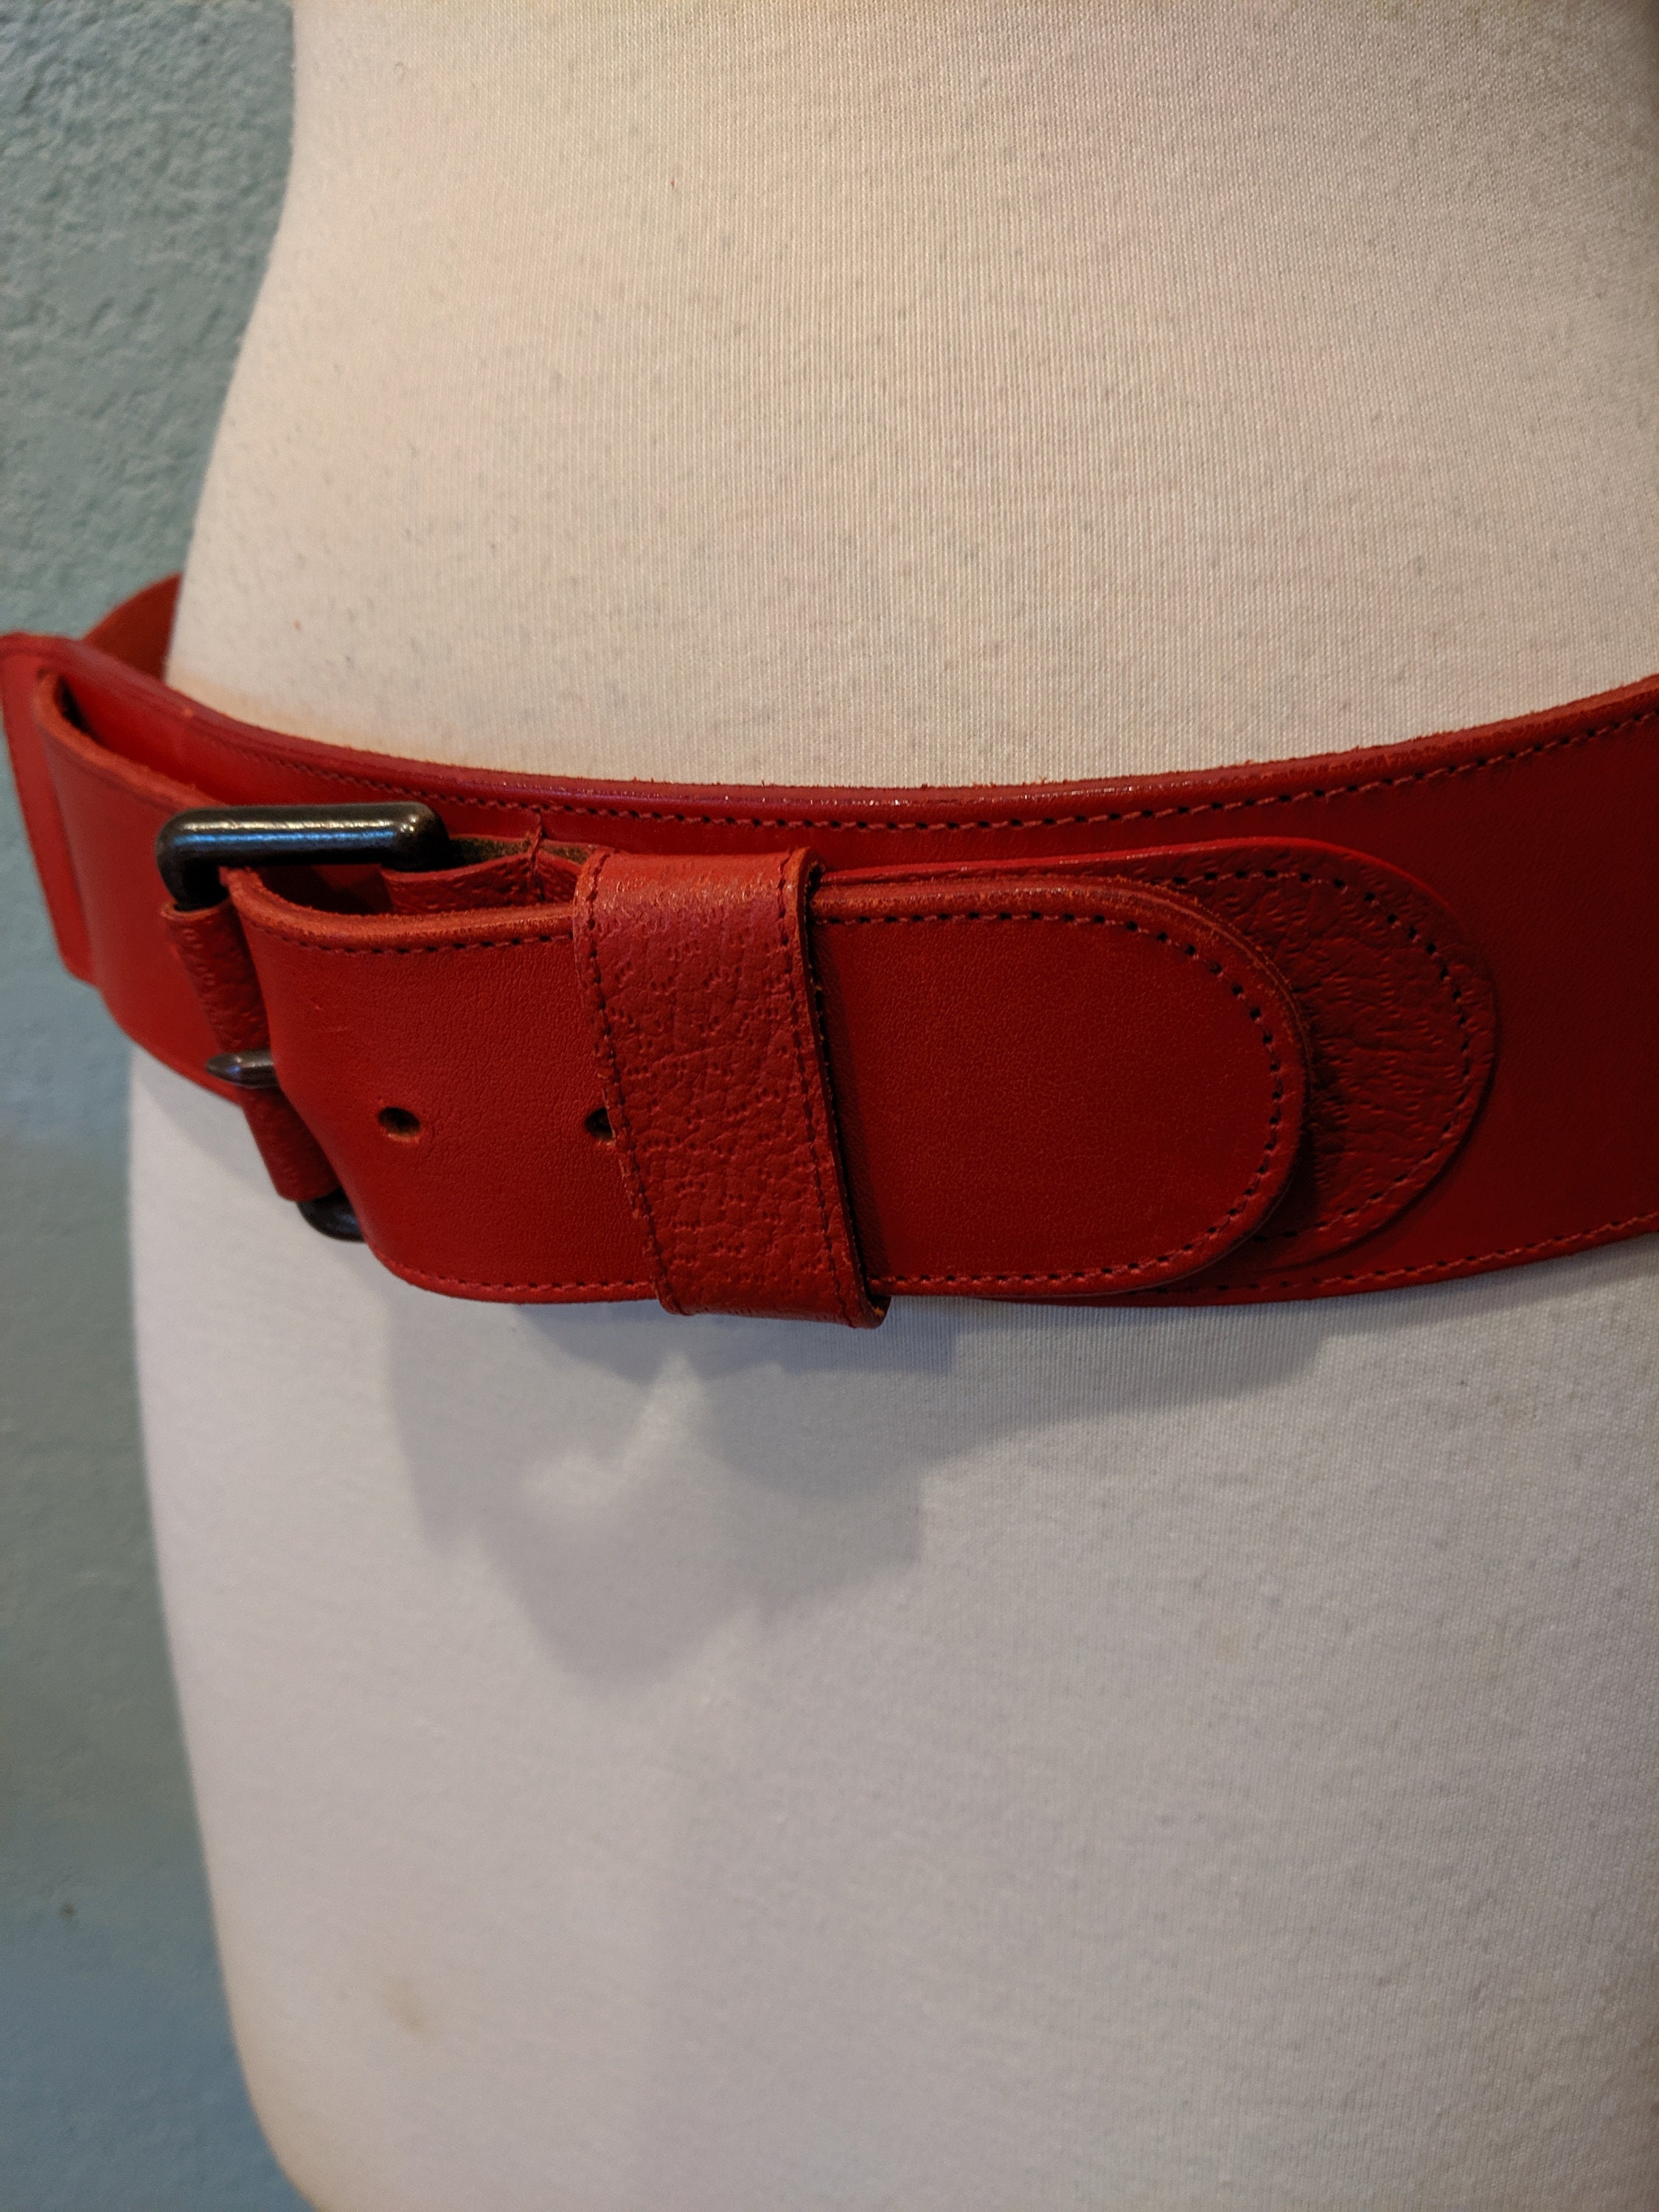 Wide Red Leather Belt by Echo Genuine English Saddle Hide Size Large ...